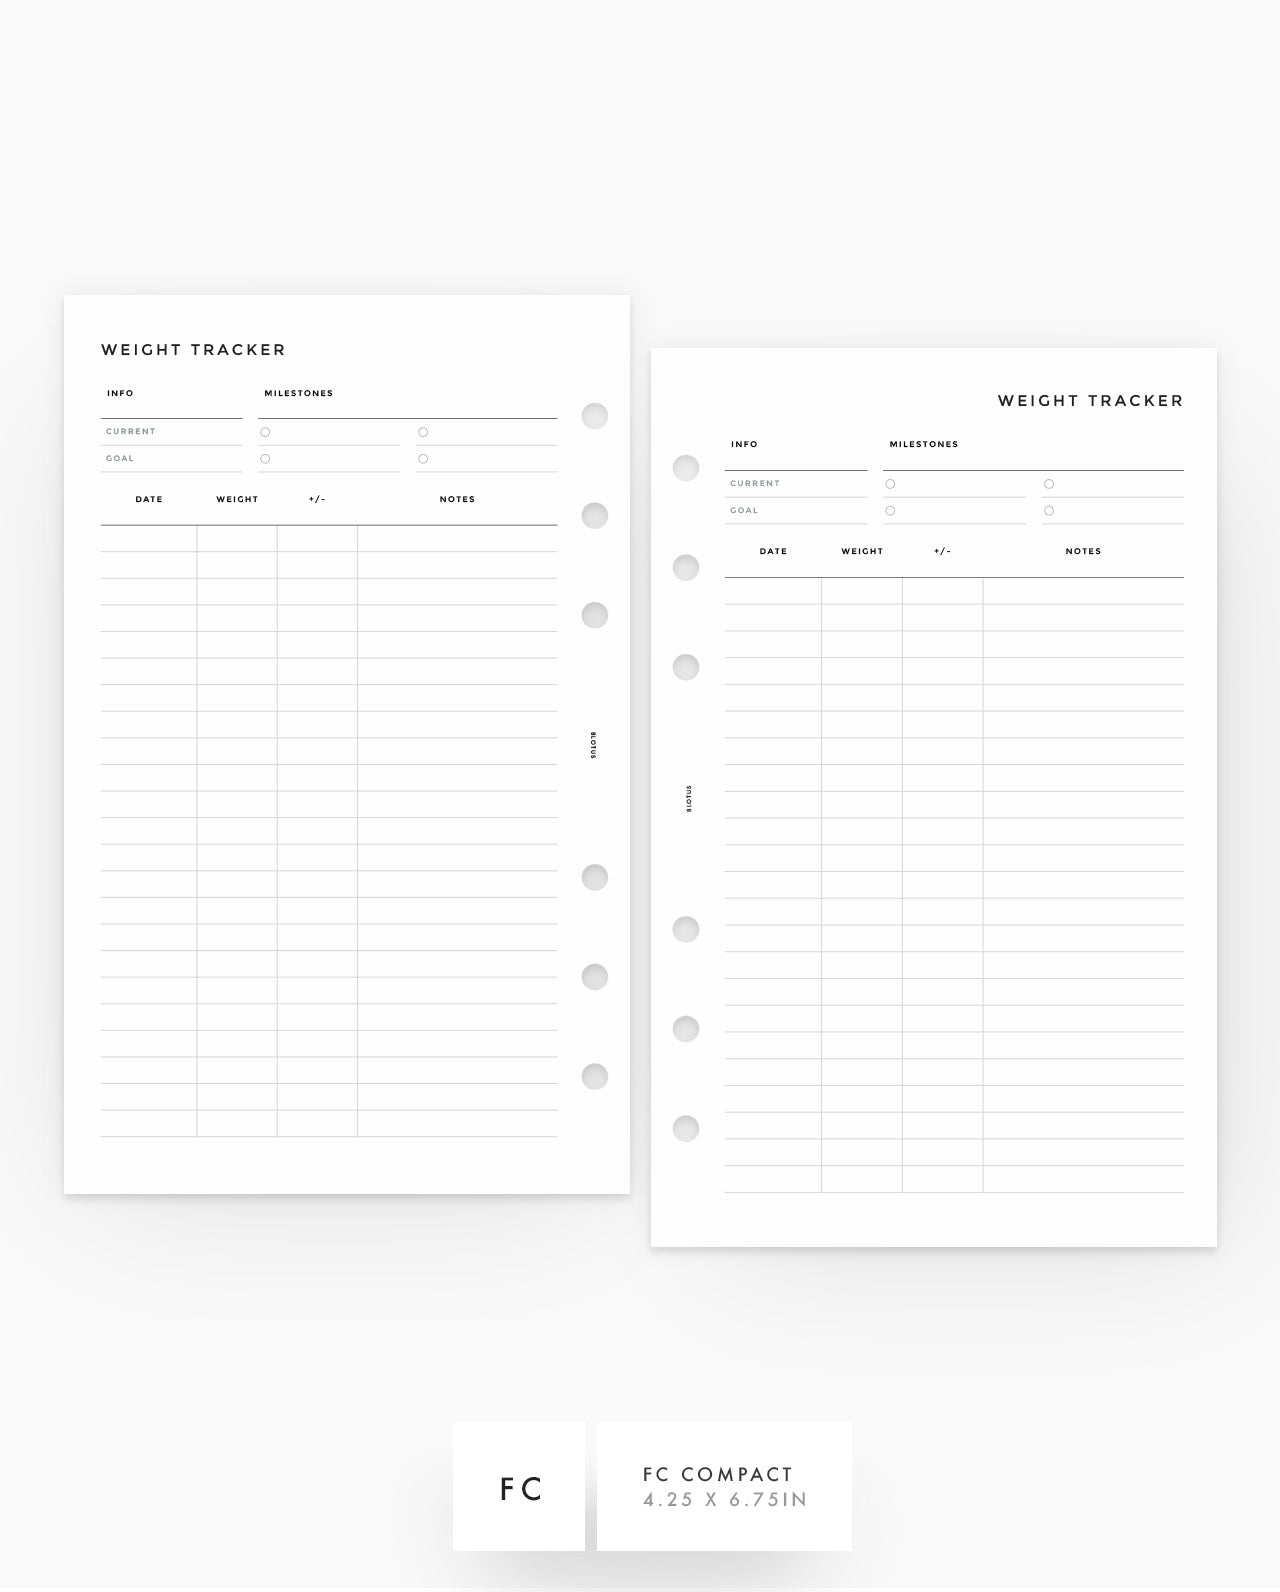 Weight Tracker Printable